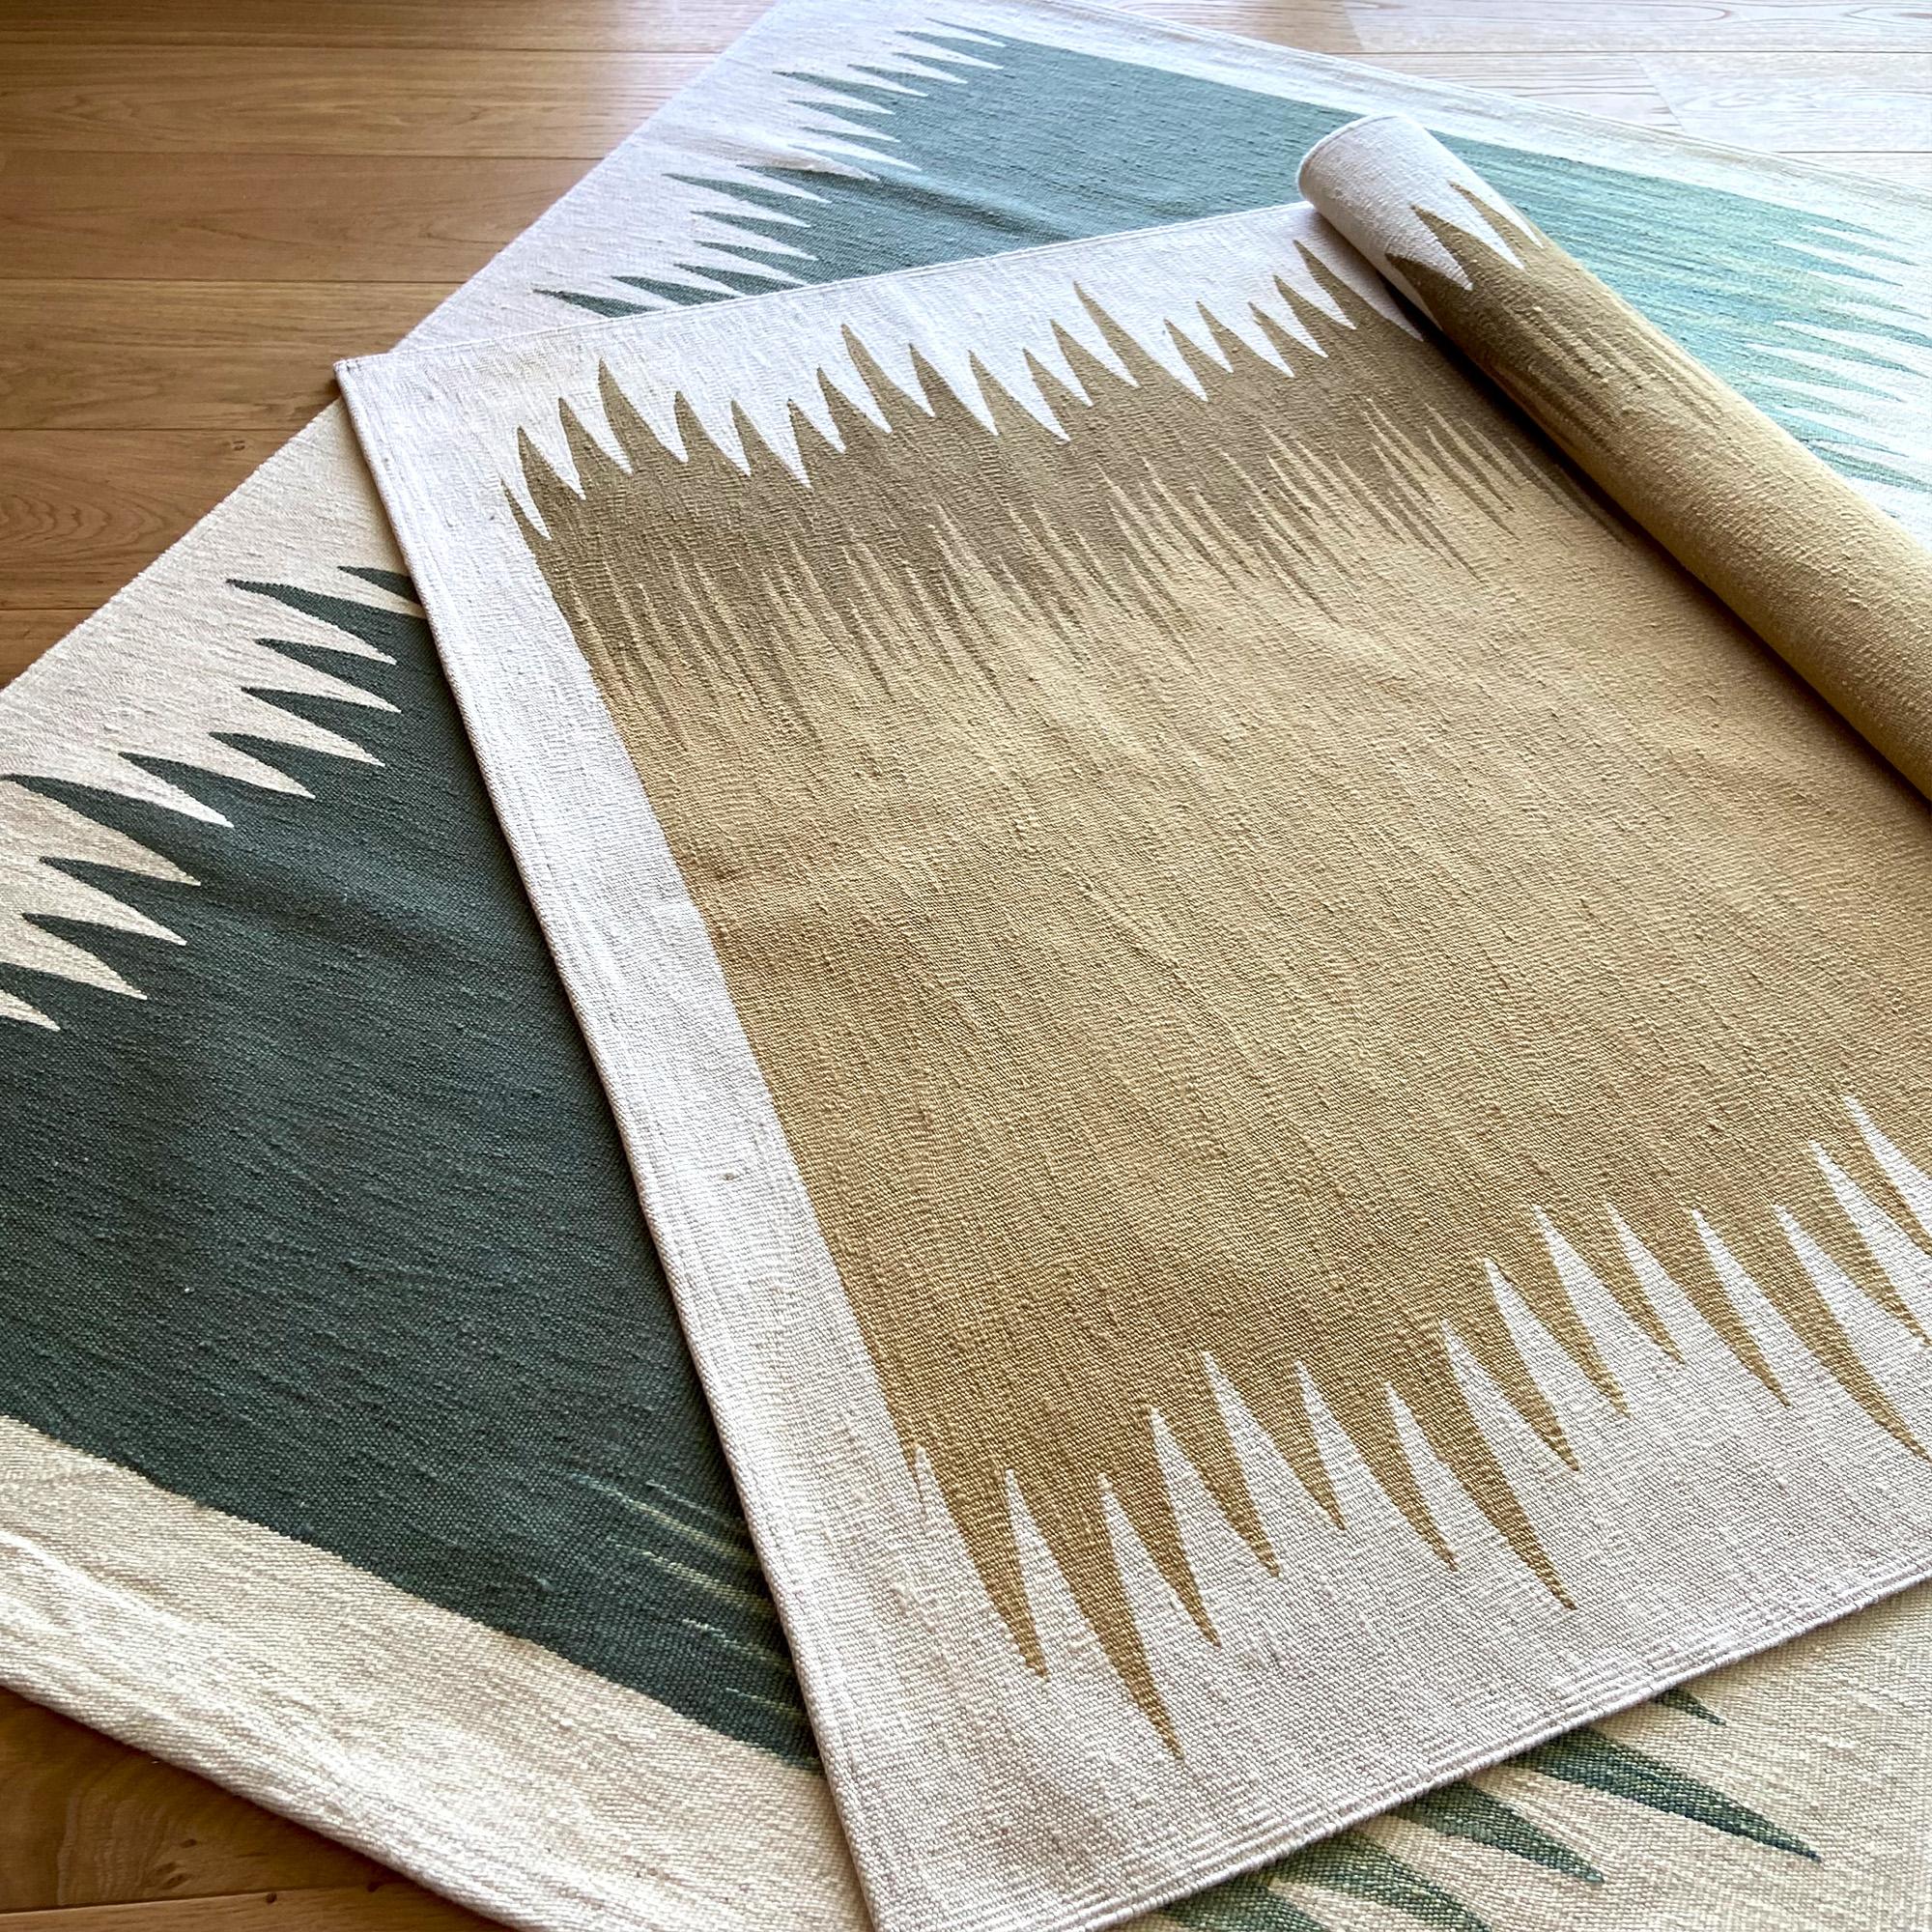 Yakamoz No 4 Contemporary Modern Kilim Rug, Wool Handwoven Green and Dune White In New Condition For Sale In Istanbul, TR